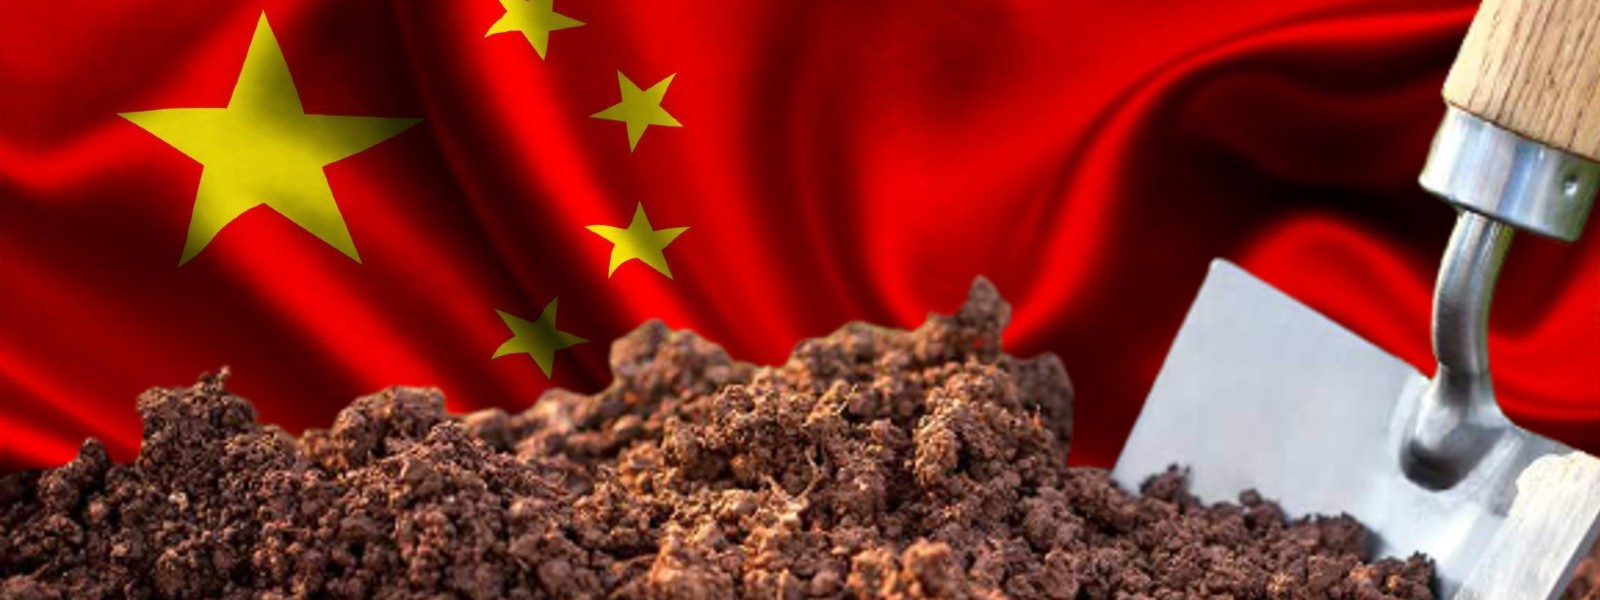 AG tells to solve Chinese fertilizer issue via terms that can be agreed by both parties.